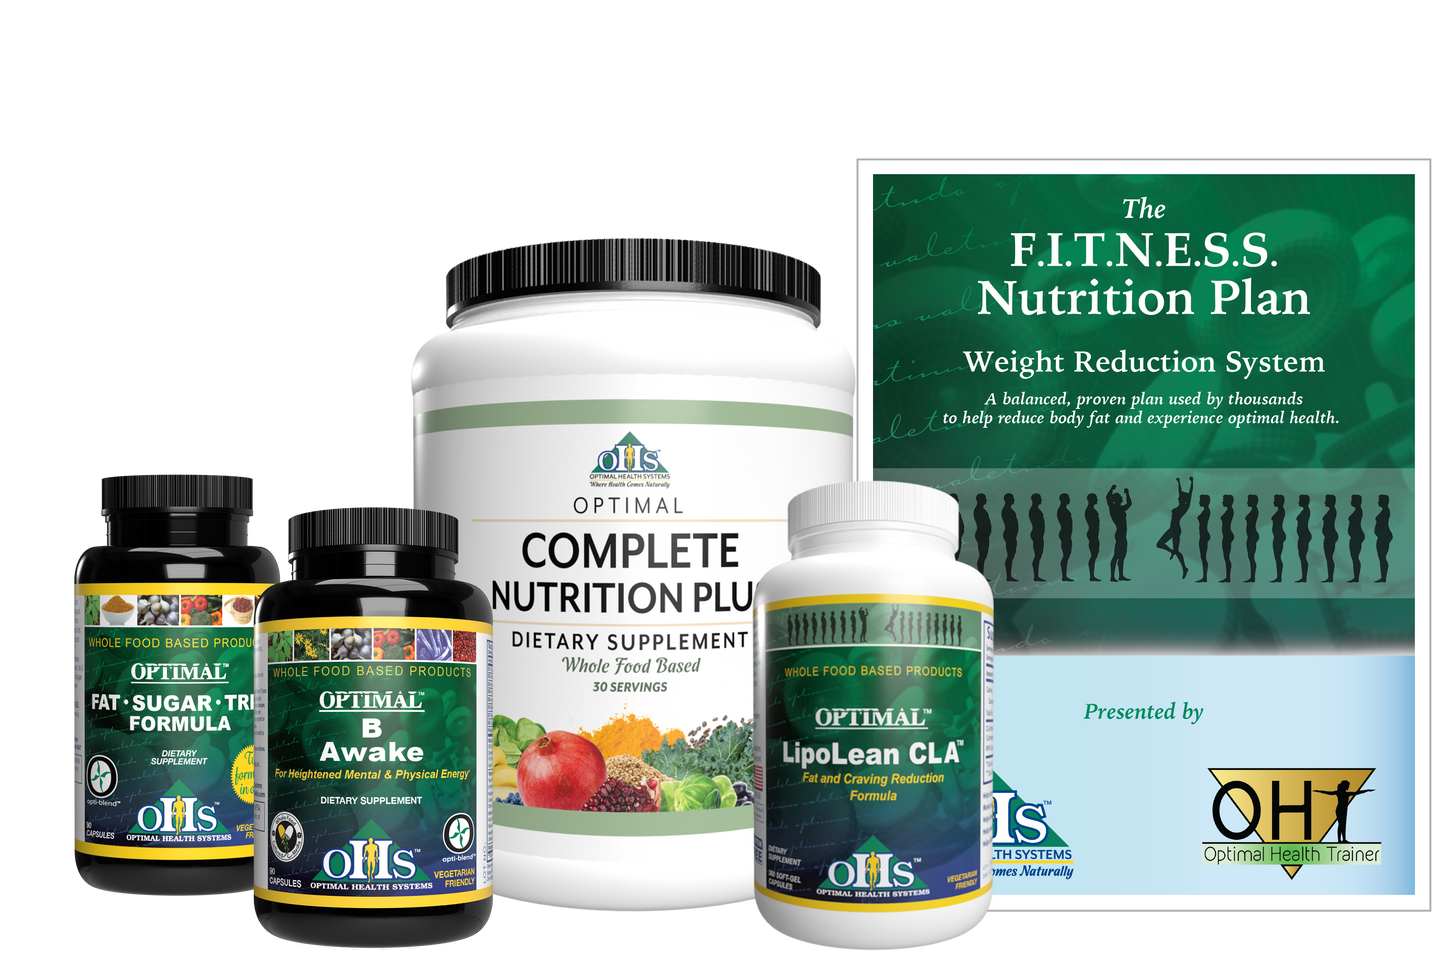 Image of a bottle of Fat Sugar Trim, B-awake, LipoLean CLA, Complete Nutrition Plus, and an F.I.T.N.E.S.S. Nutrition plan booklet.